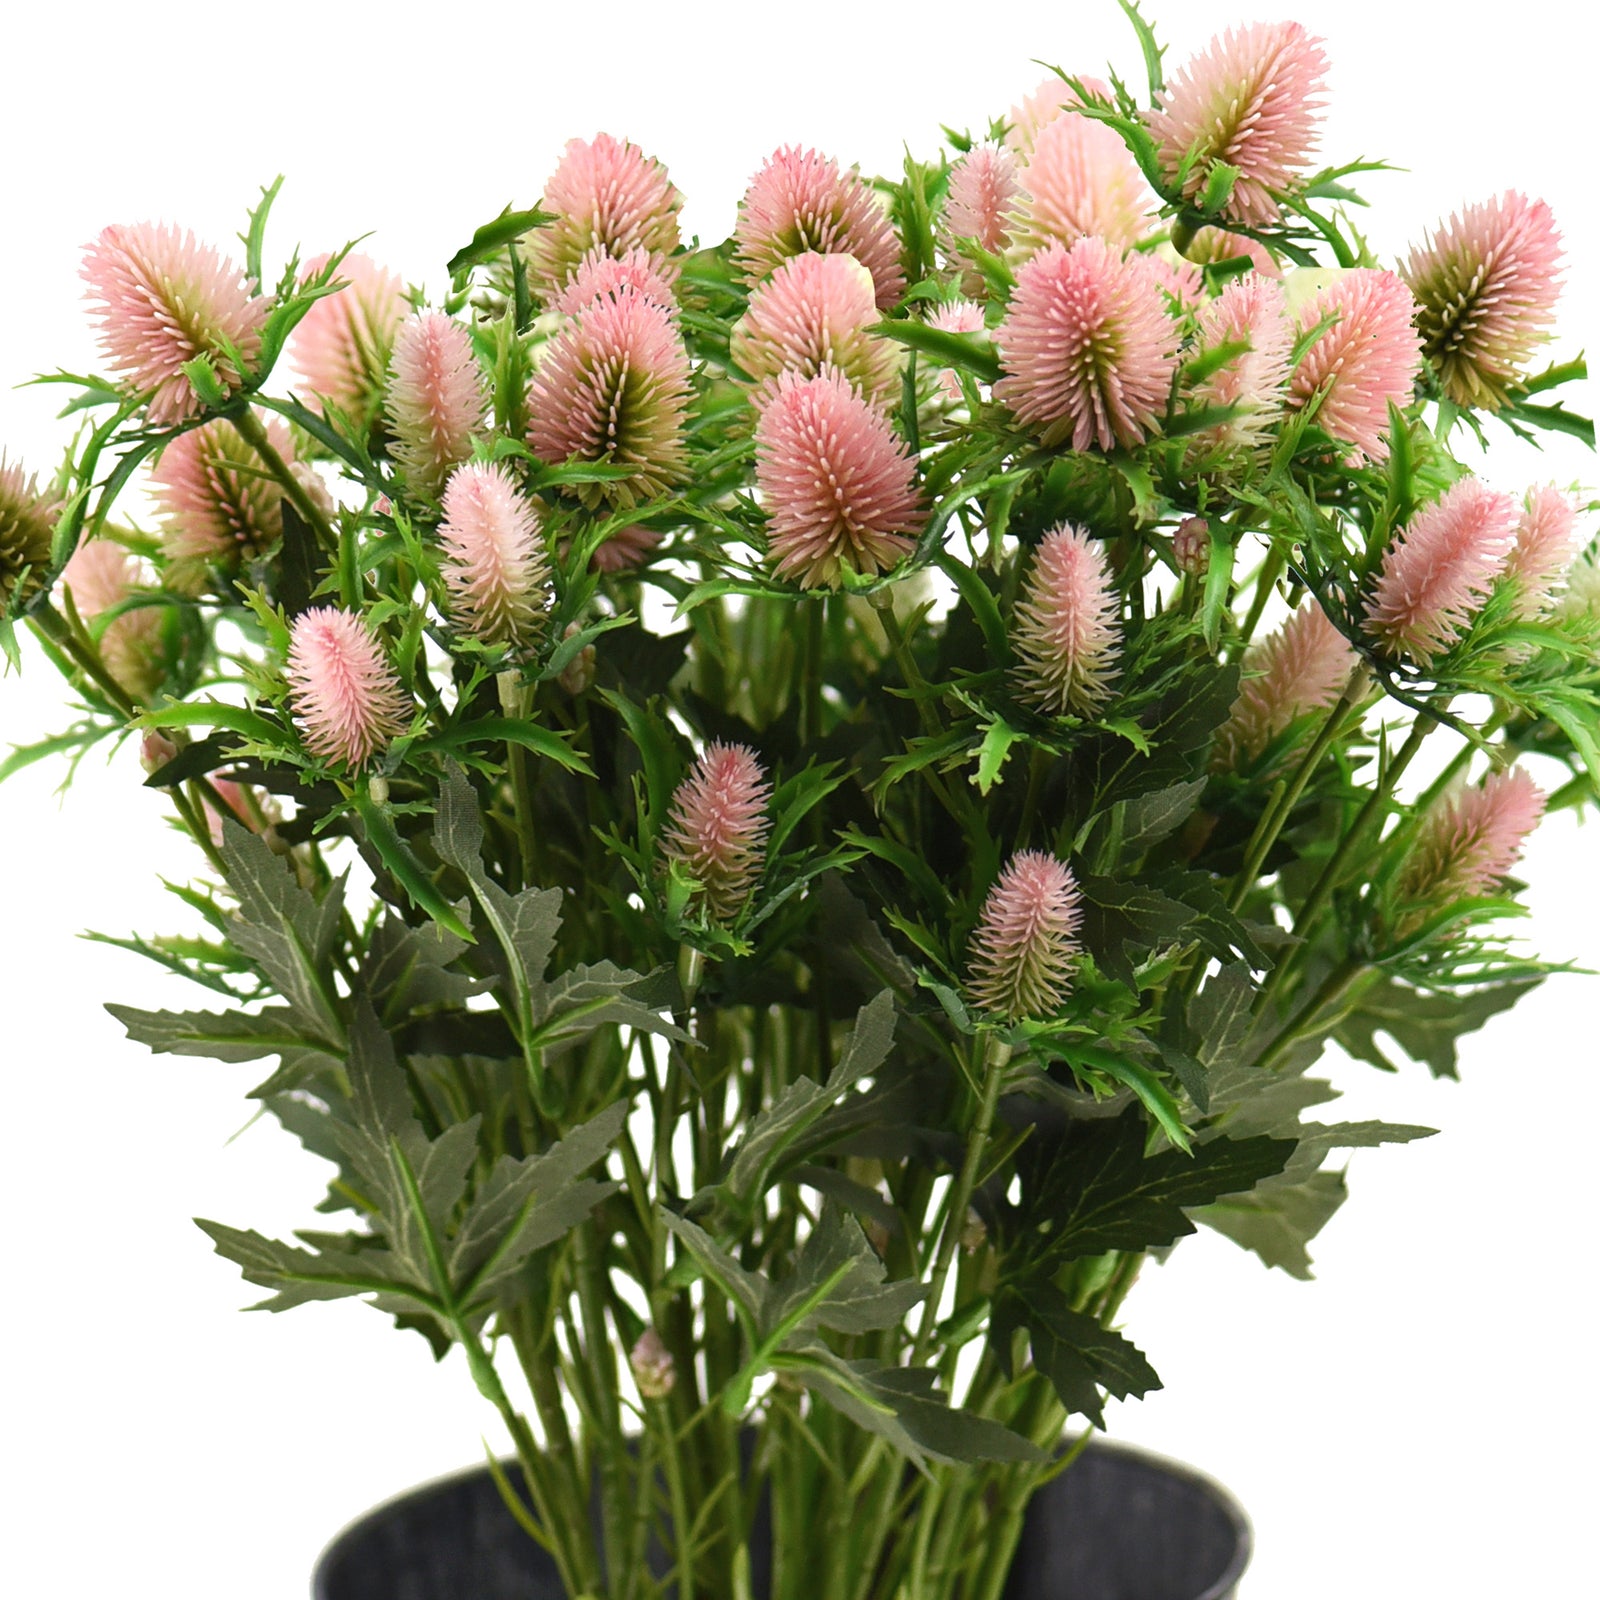 Real Size Artificial Real Touch Eryngium (Sea Holly) Pink Thistles (5 Stems)